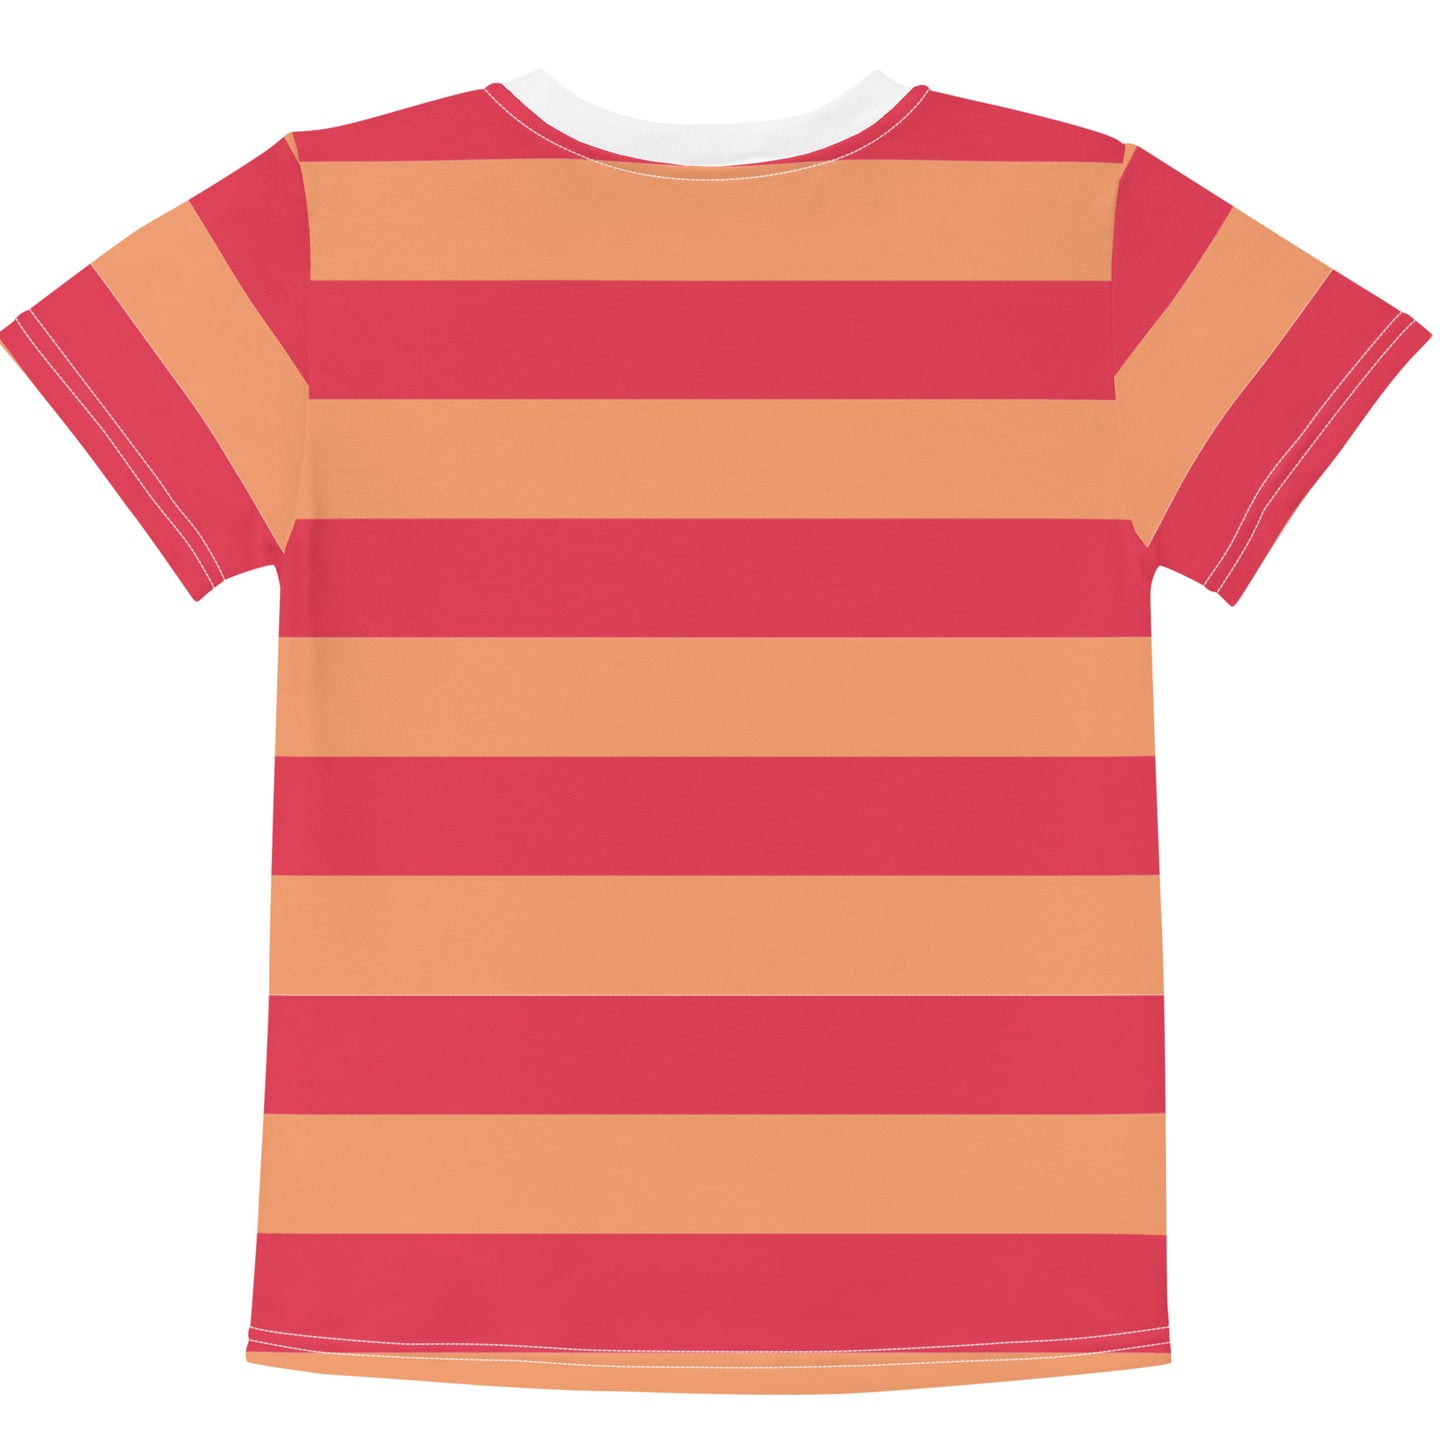 Sailor Orange red - Sustainably Made Kids T-Shirt